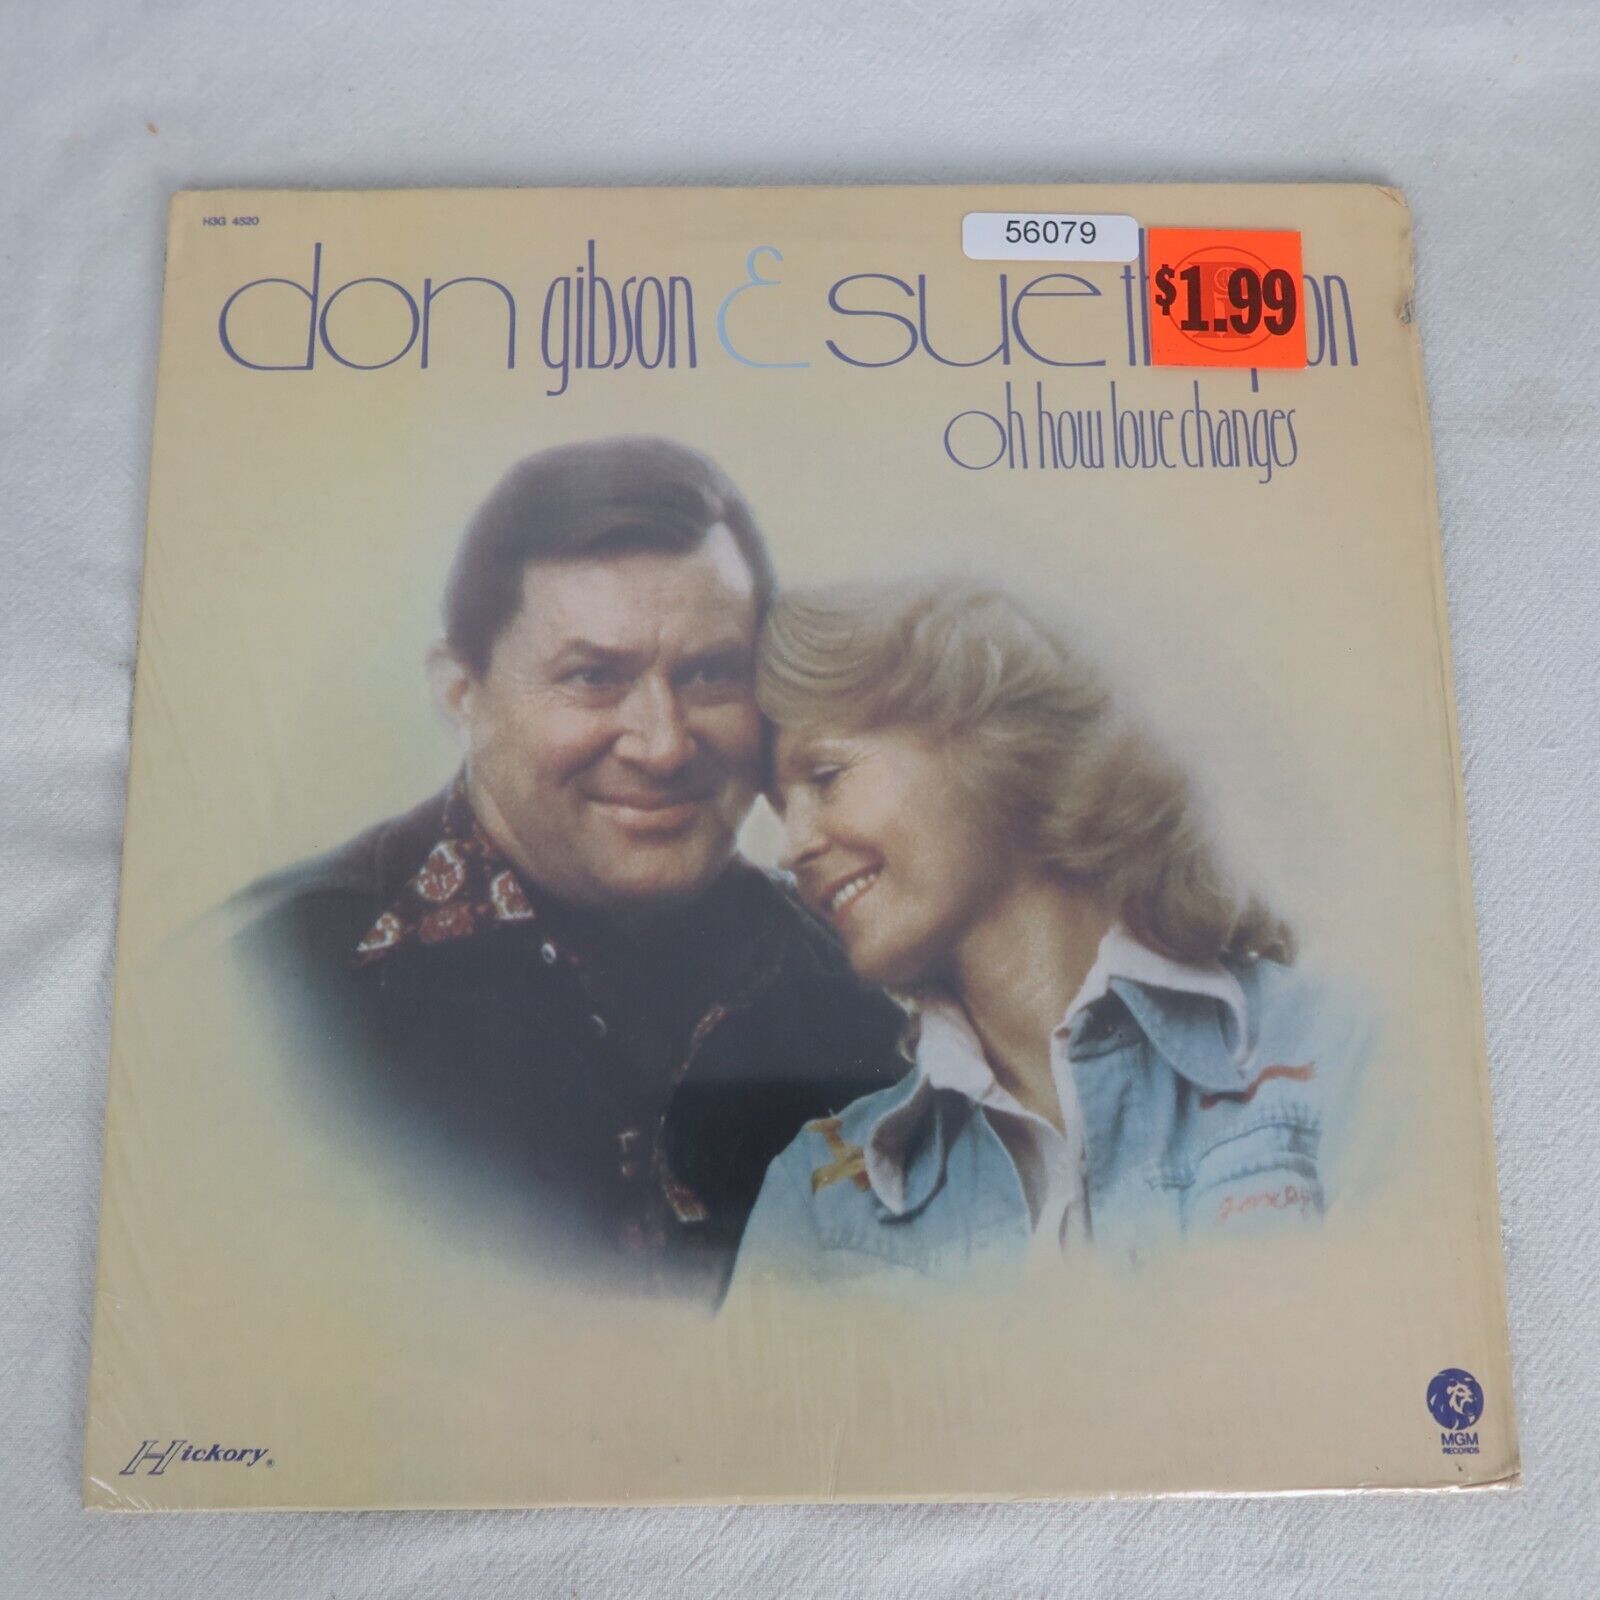 Don Gibson And Sue Thompson Oh How Love Changes w/ Shrink LP Vinyl Record Album